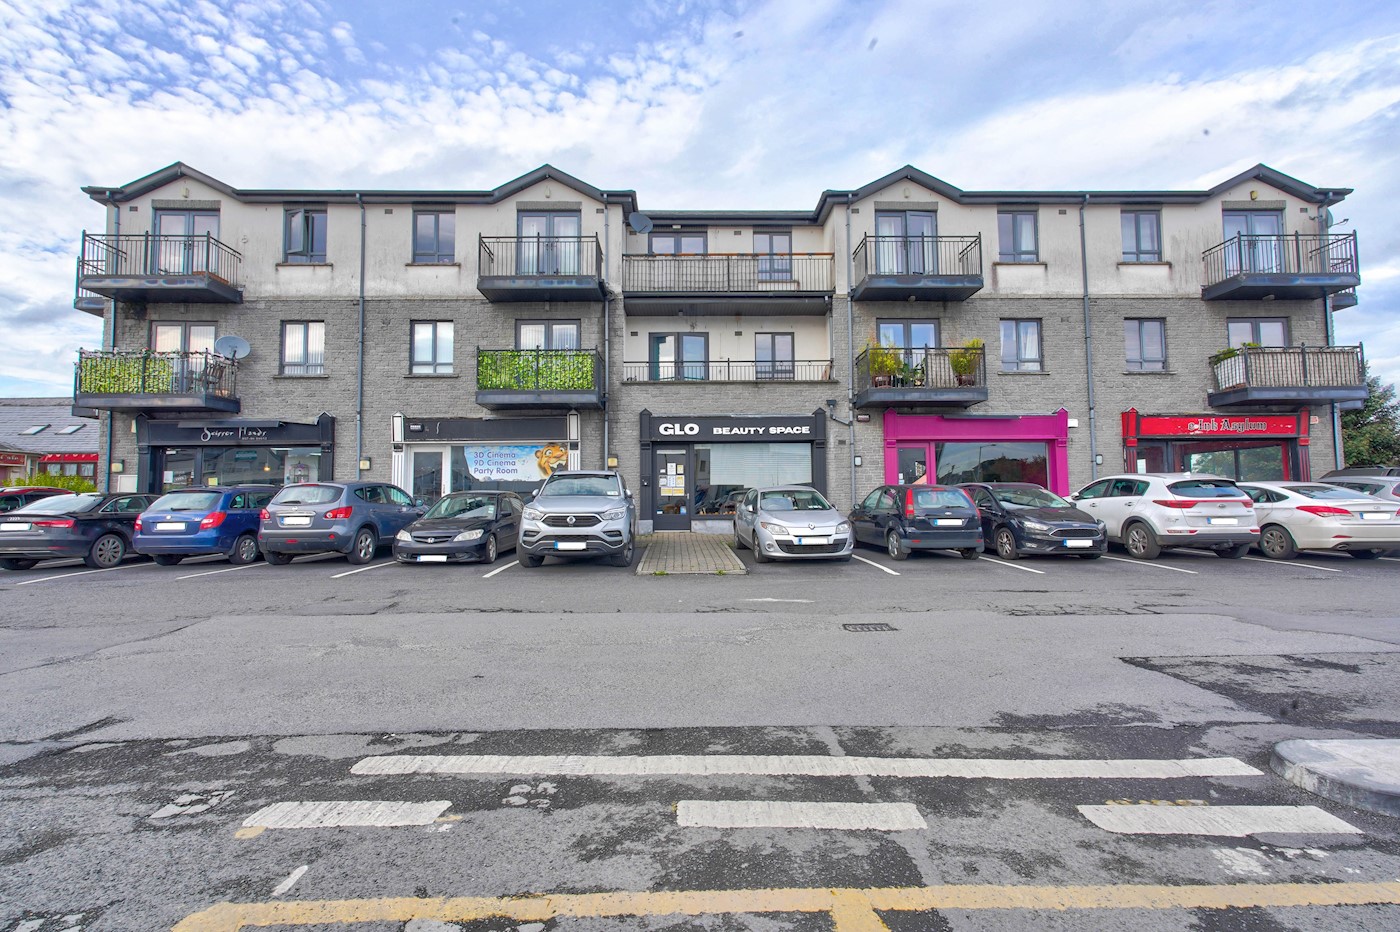 Apartment 8, The Tannery, Link Road, Portarlington, Co. Laois, R32 Y884 1/14